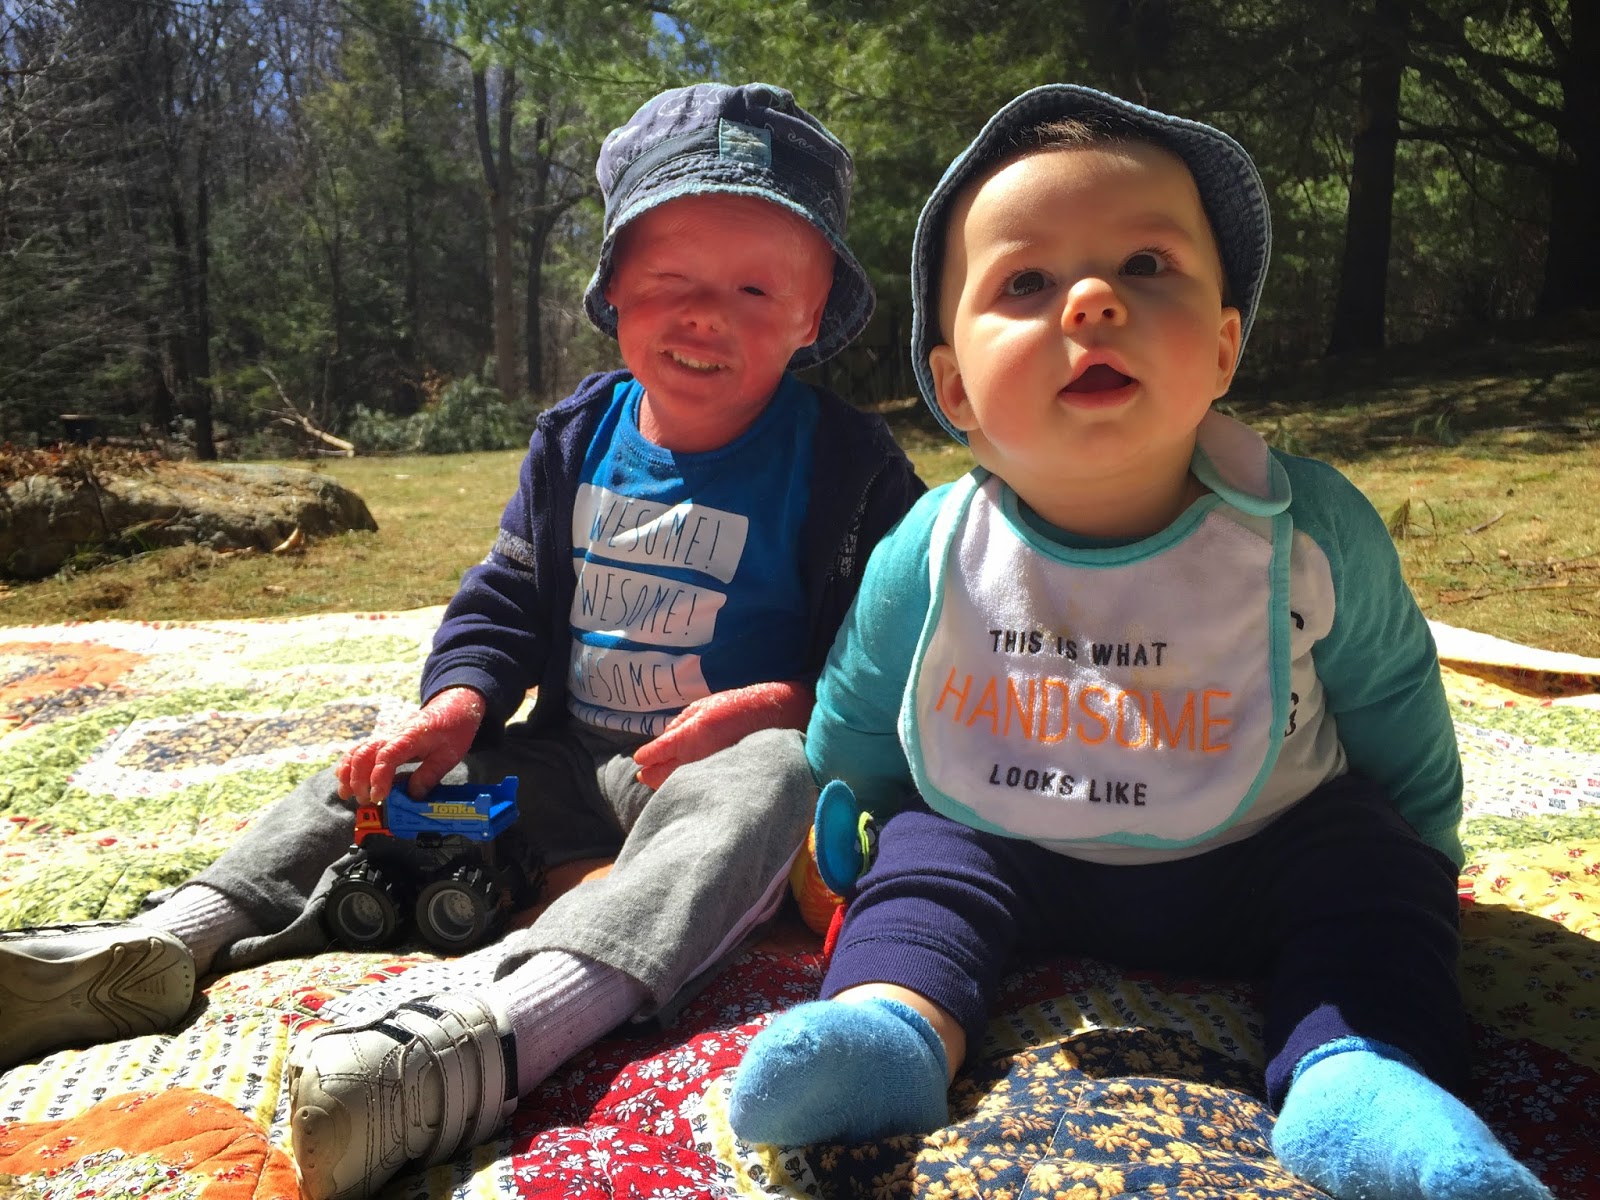 Evan, who has Harlequin Ichthyosis, with his brother